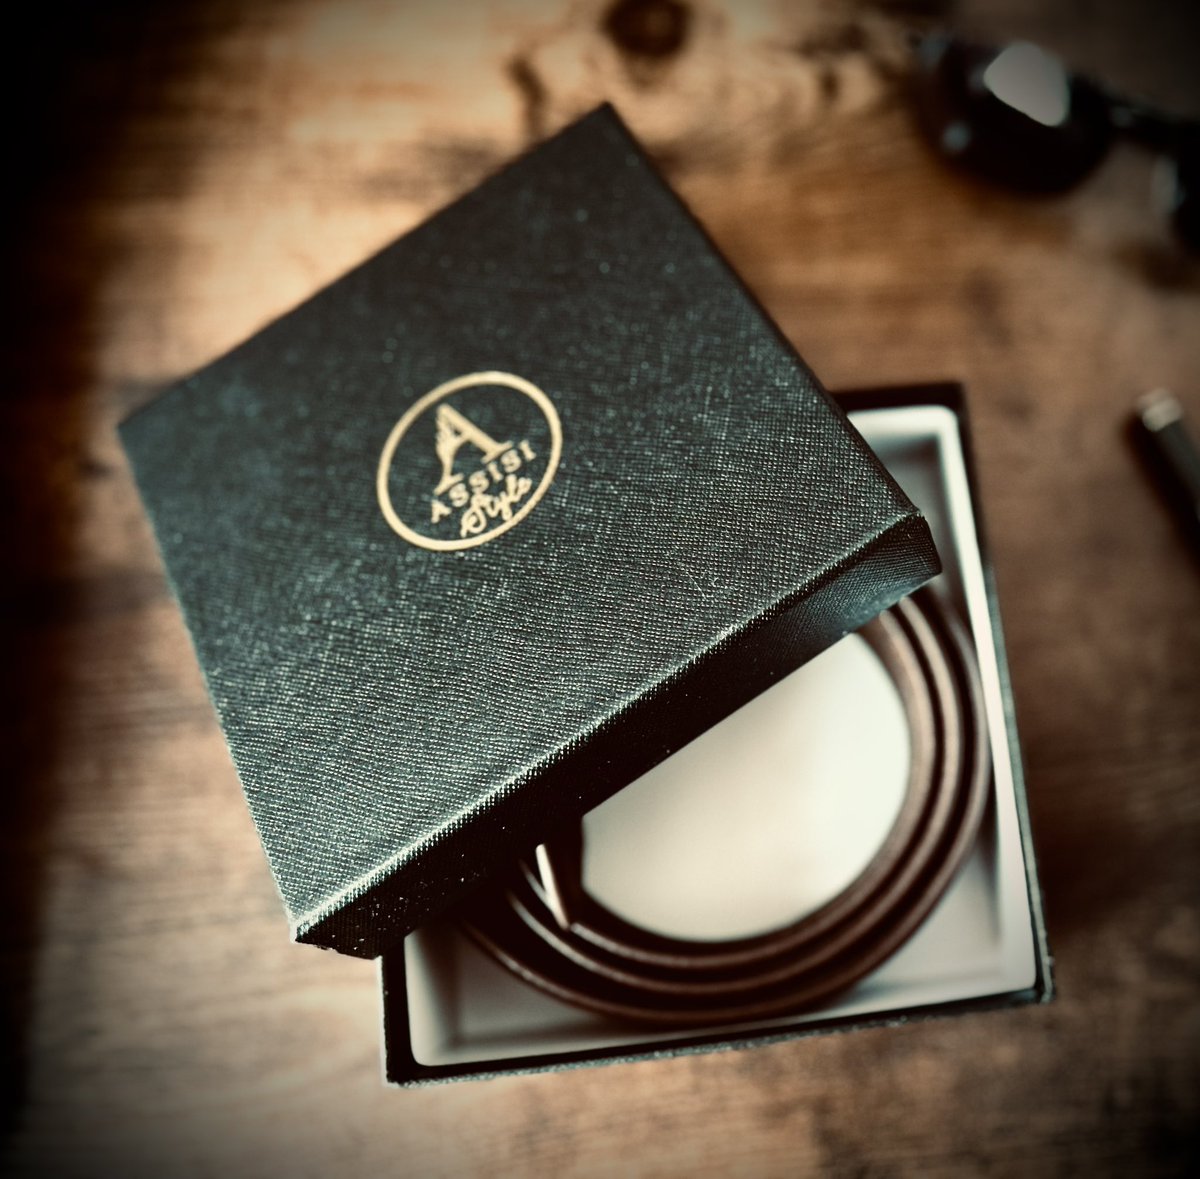 Sophisticated, stylish and 100% #vegan 

#sustainable #cork #belts for men, presented in an attractive gift box. The ideal #gift for men #vegangifts #giftsforhim #giftsforfriends #giftideas #giftidea #giftideasformen #giftideasuk